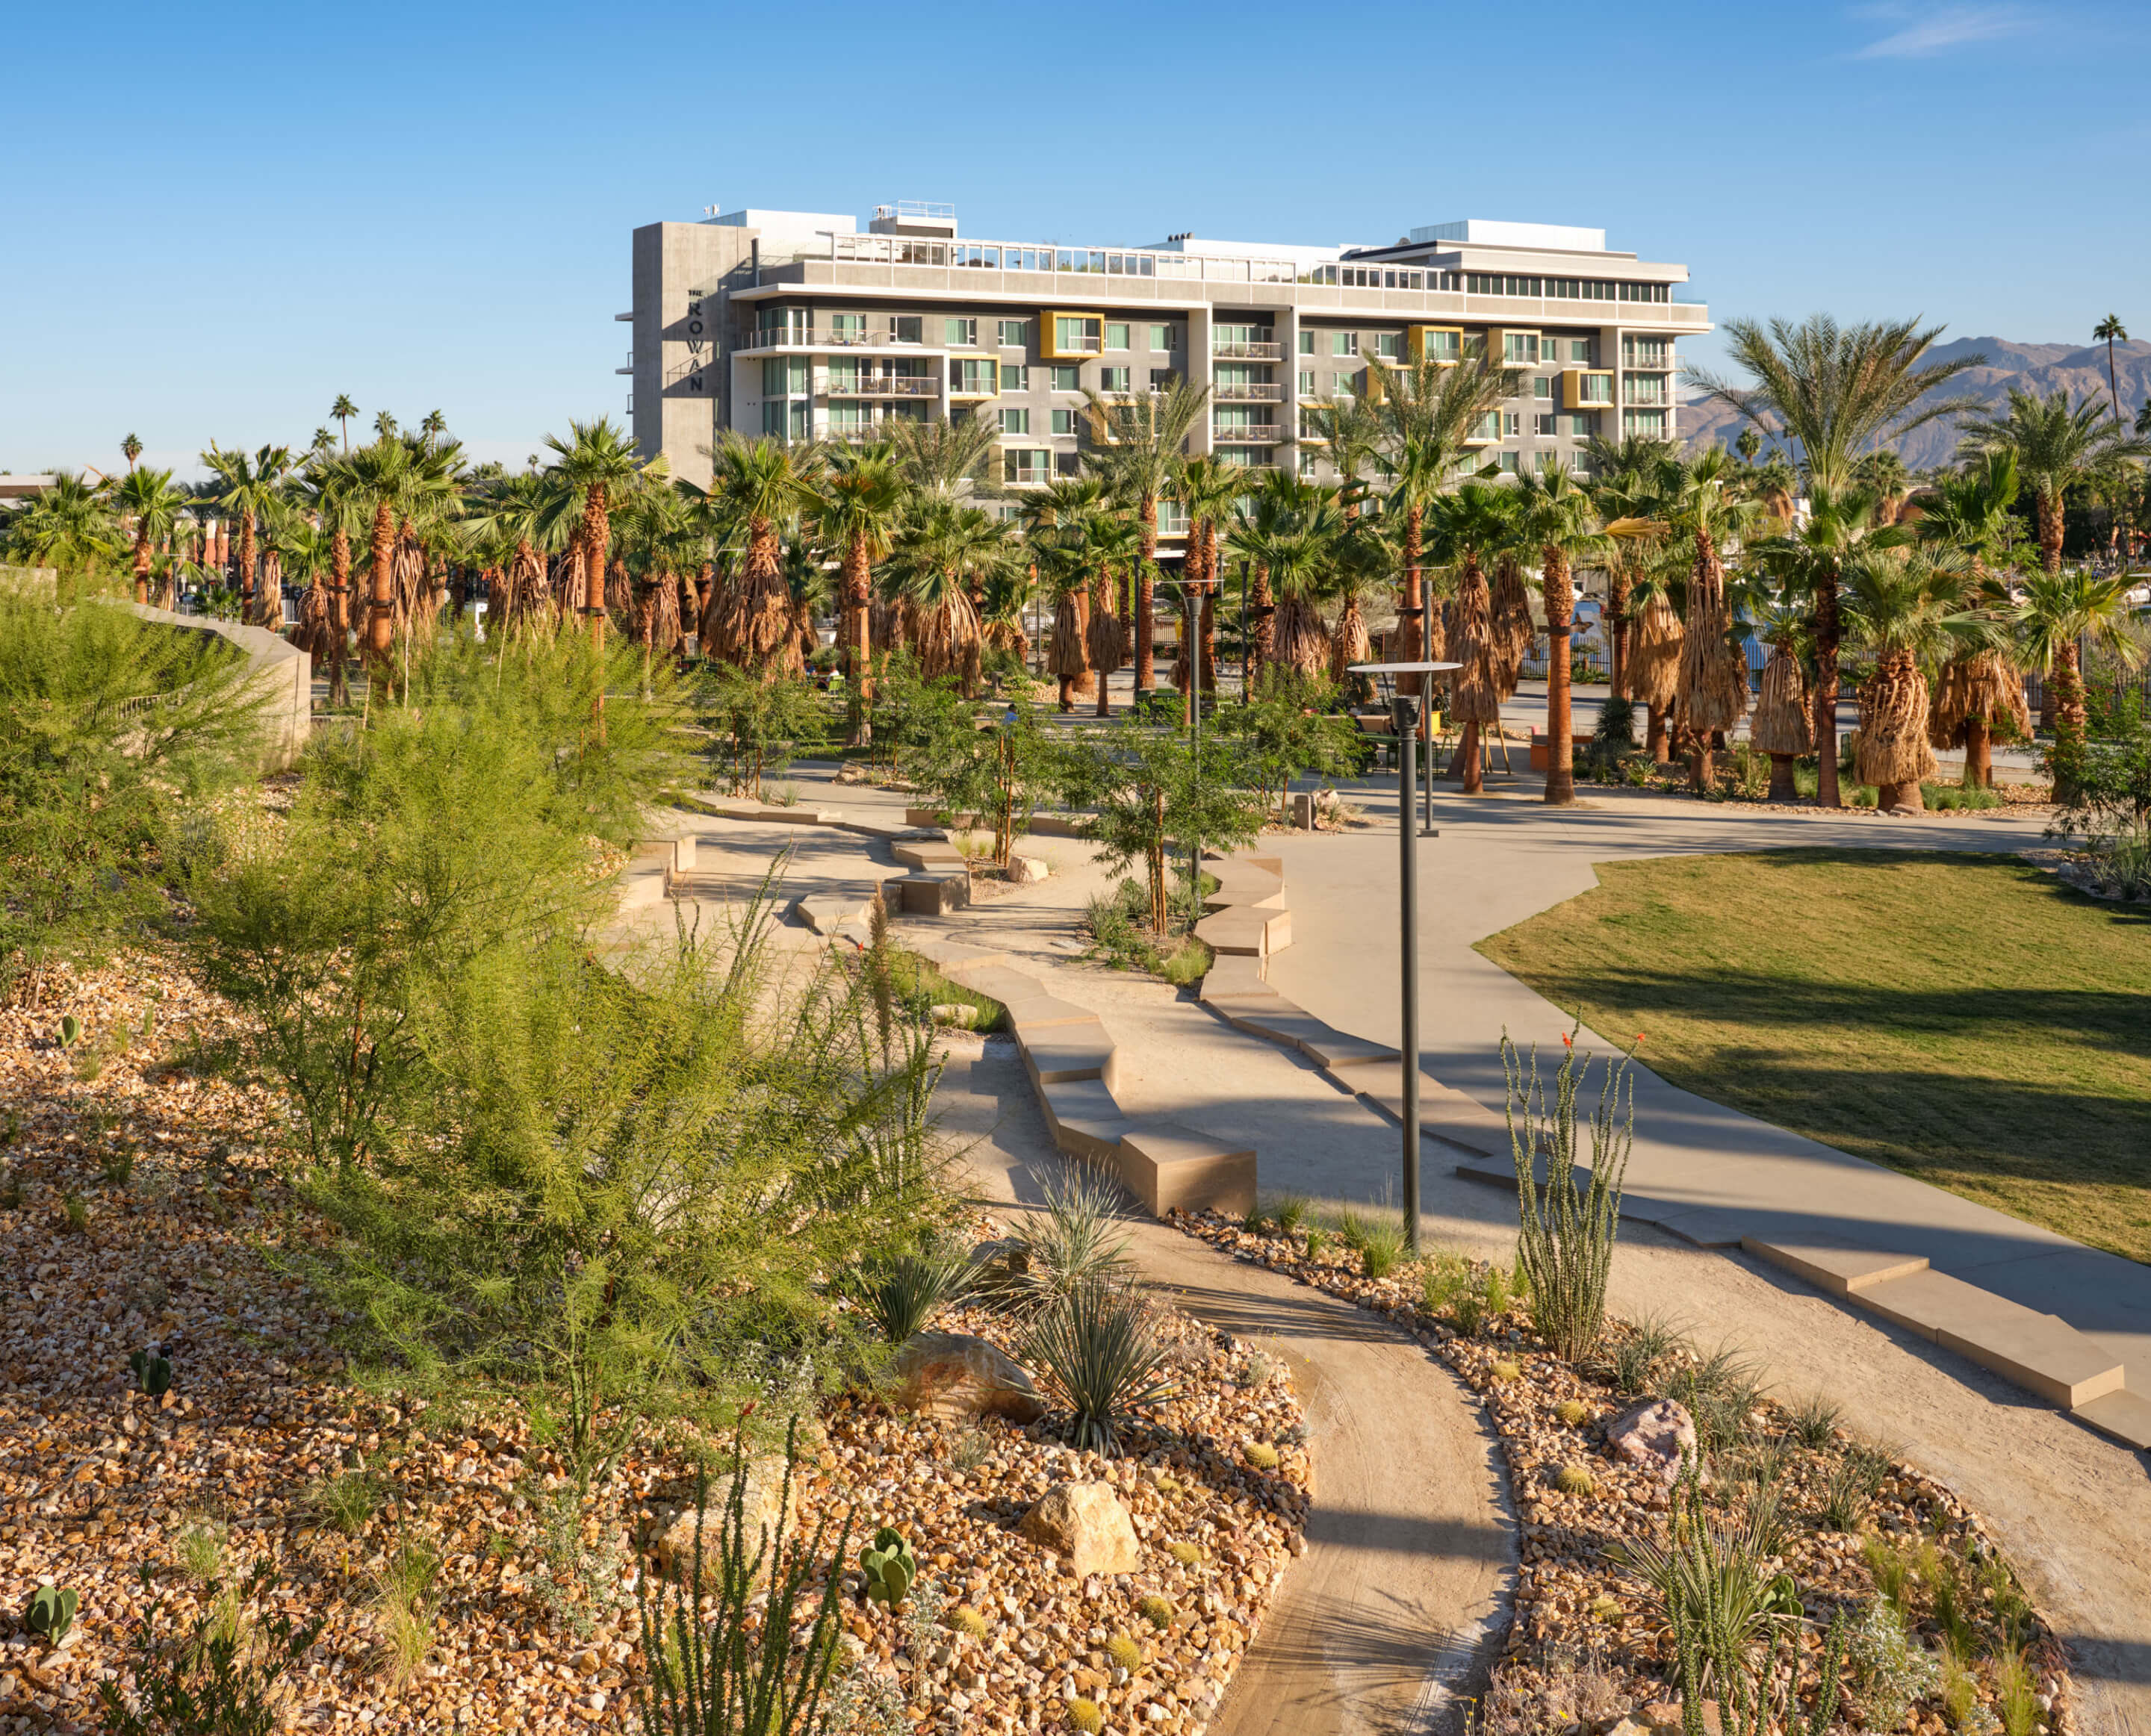 Palm Springs' Downtown Park looks beyond the desert city's